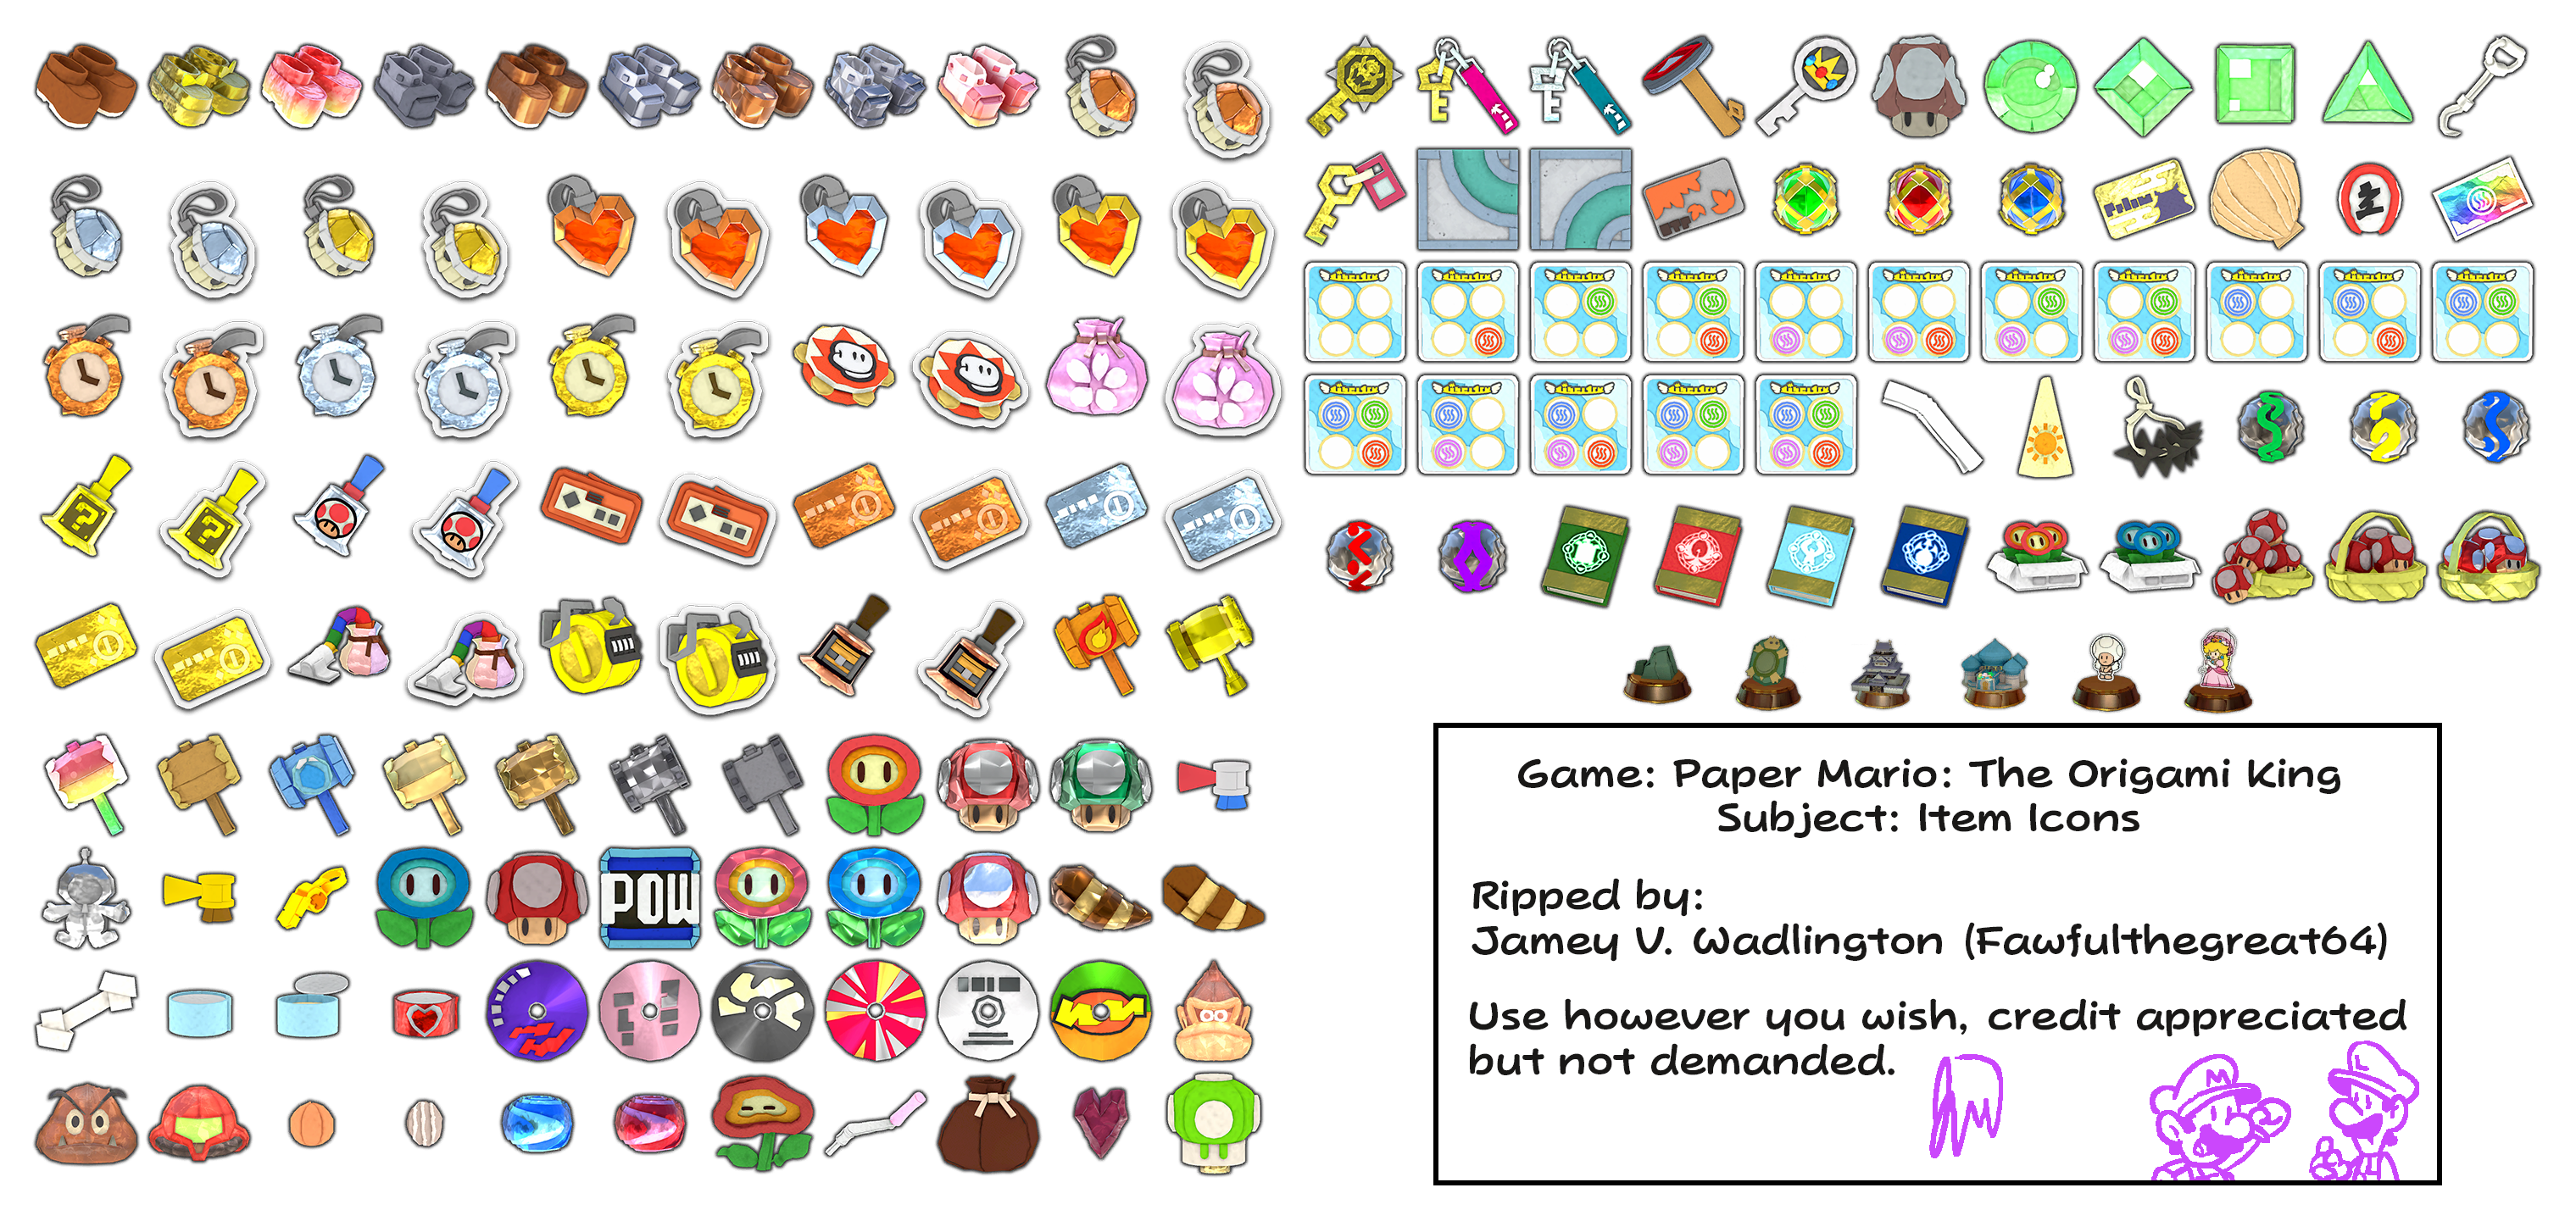 Paper Mario: The Origami King - Item Icons